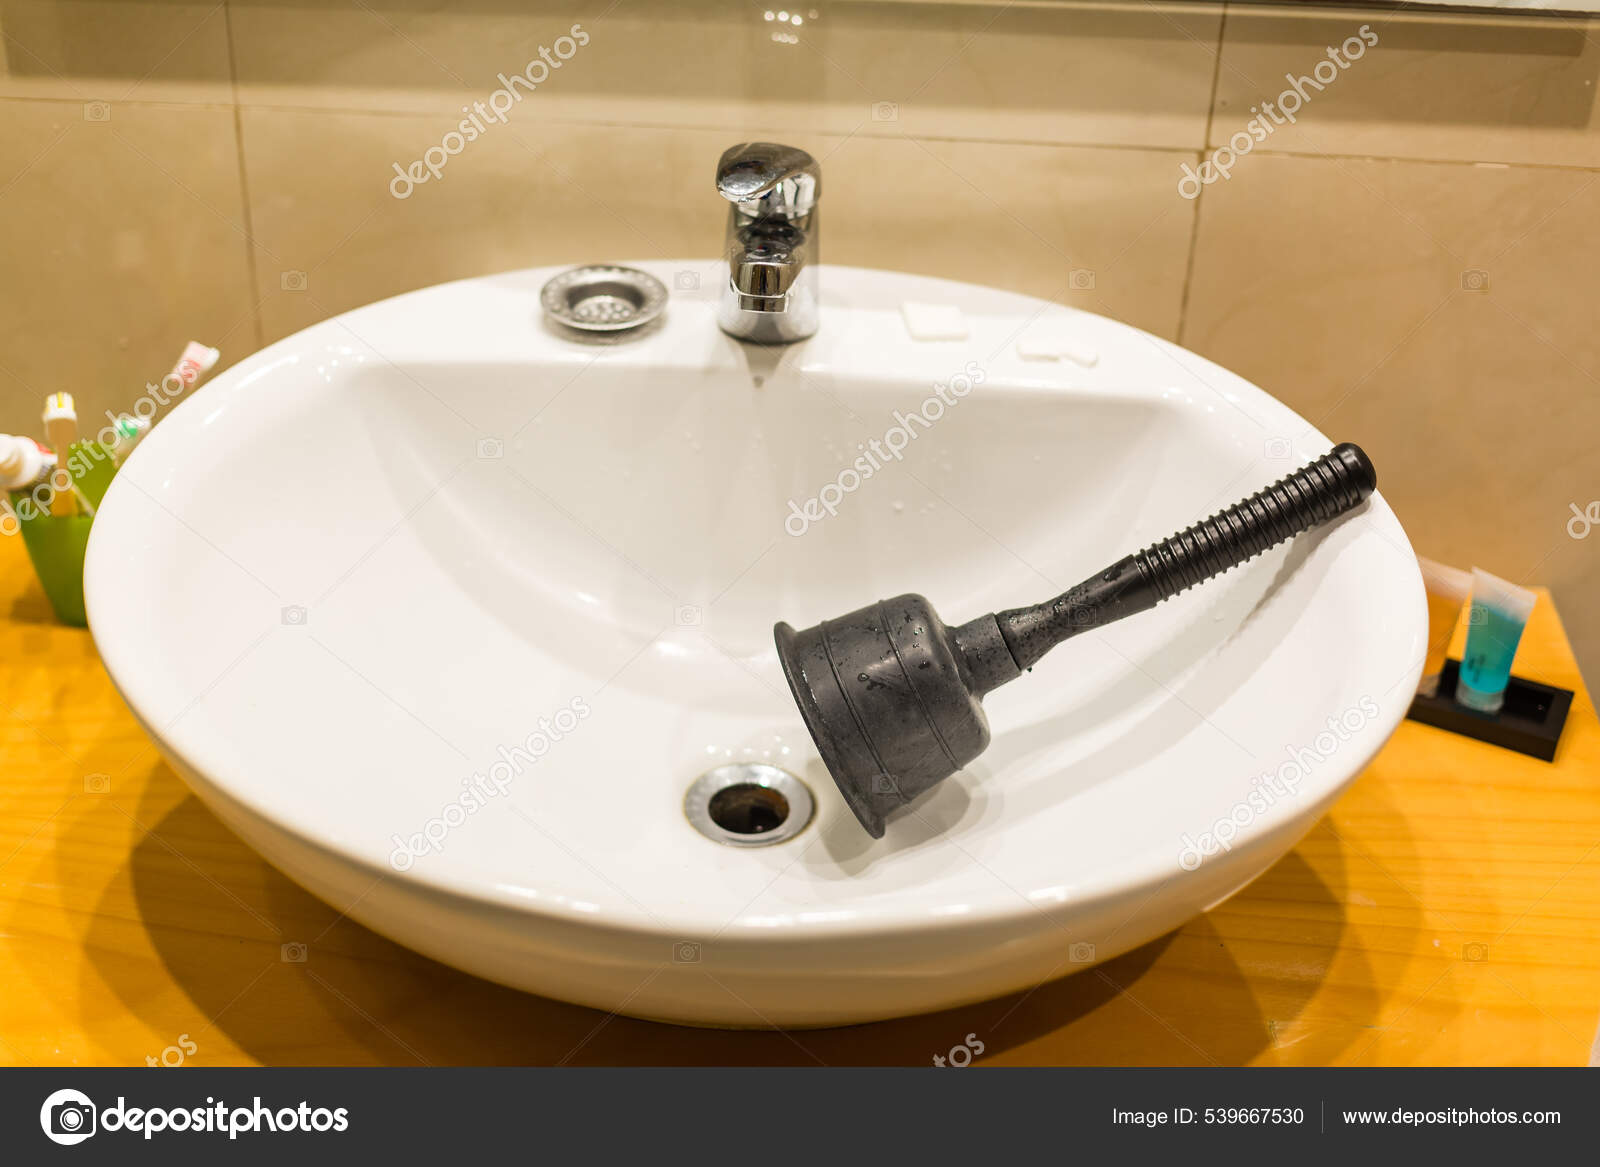 Household black sink plunger tool in bathroom sink plugged with pink  material dishrag, flattened draining tool with rubber cup and wooden shaft  or stick, water pouring from the tap. Horizontal Stock Photo